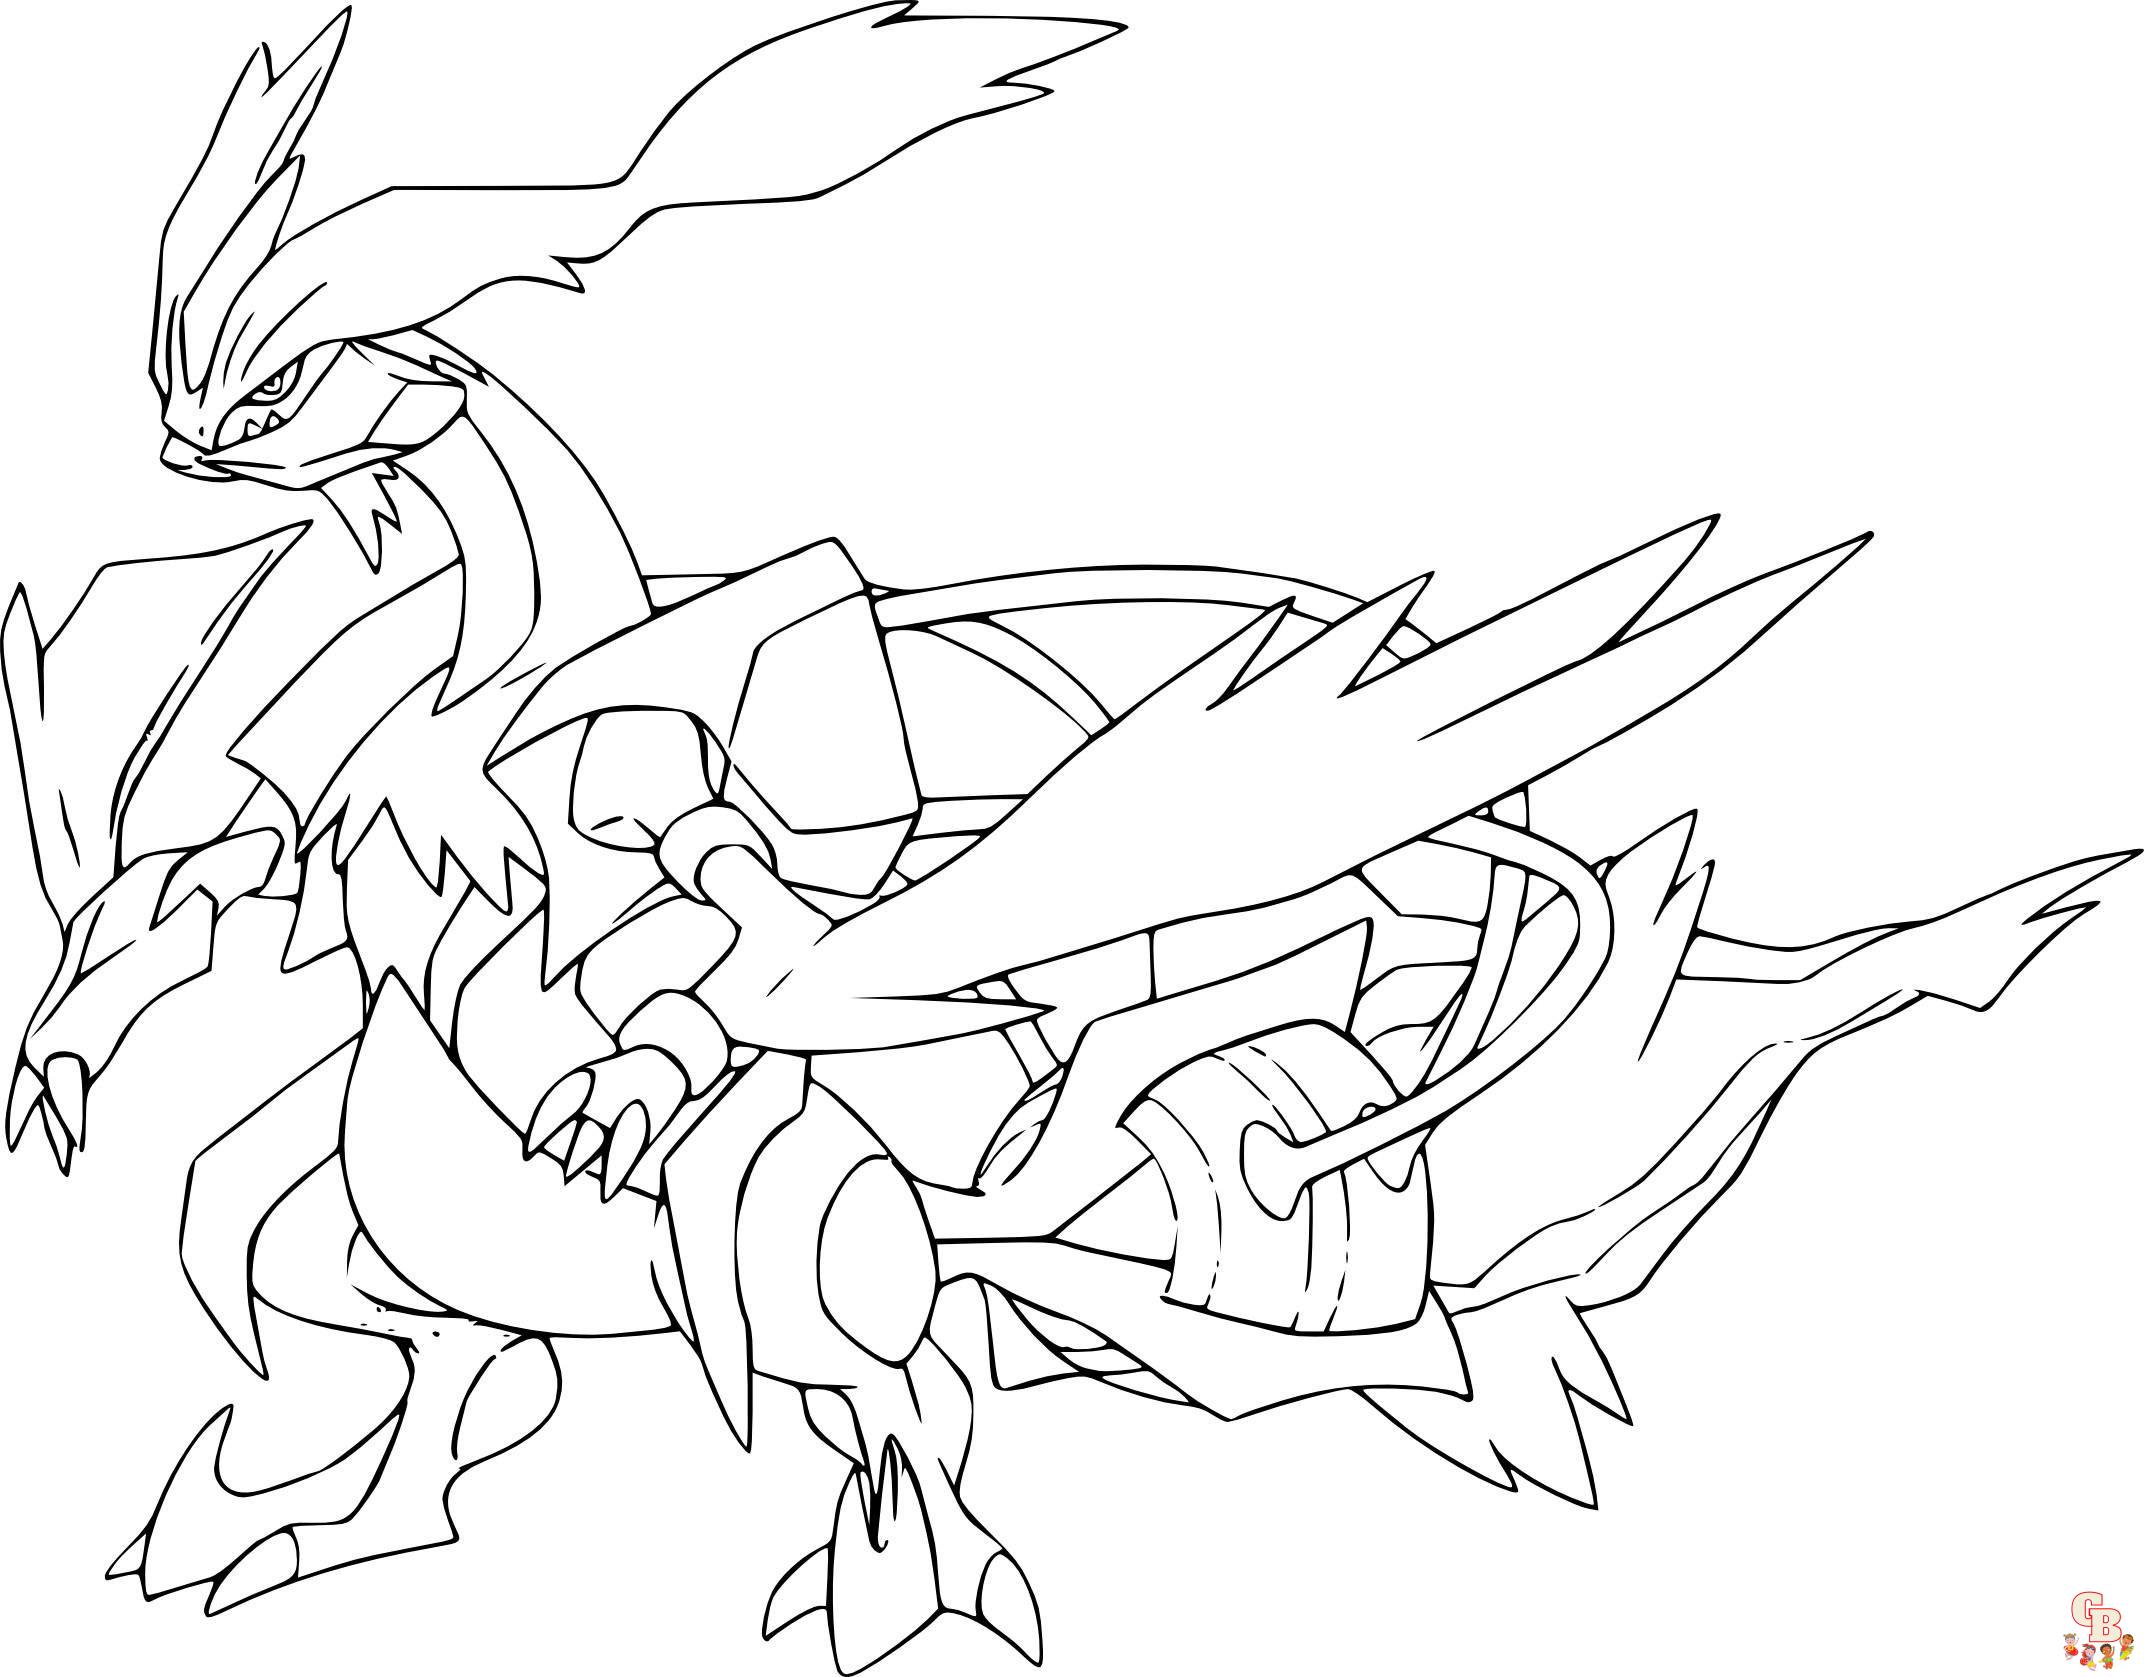 Discover the best zekrom and reshiram coloring pages for free